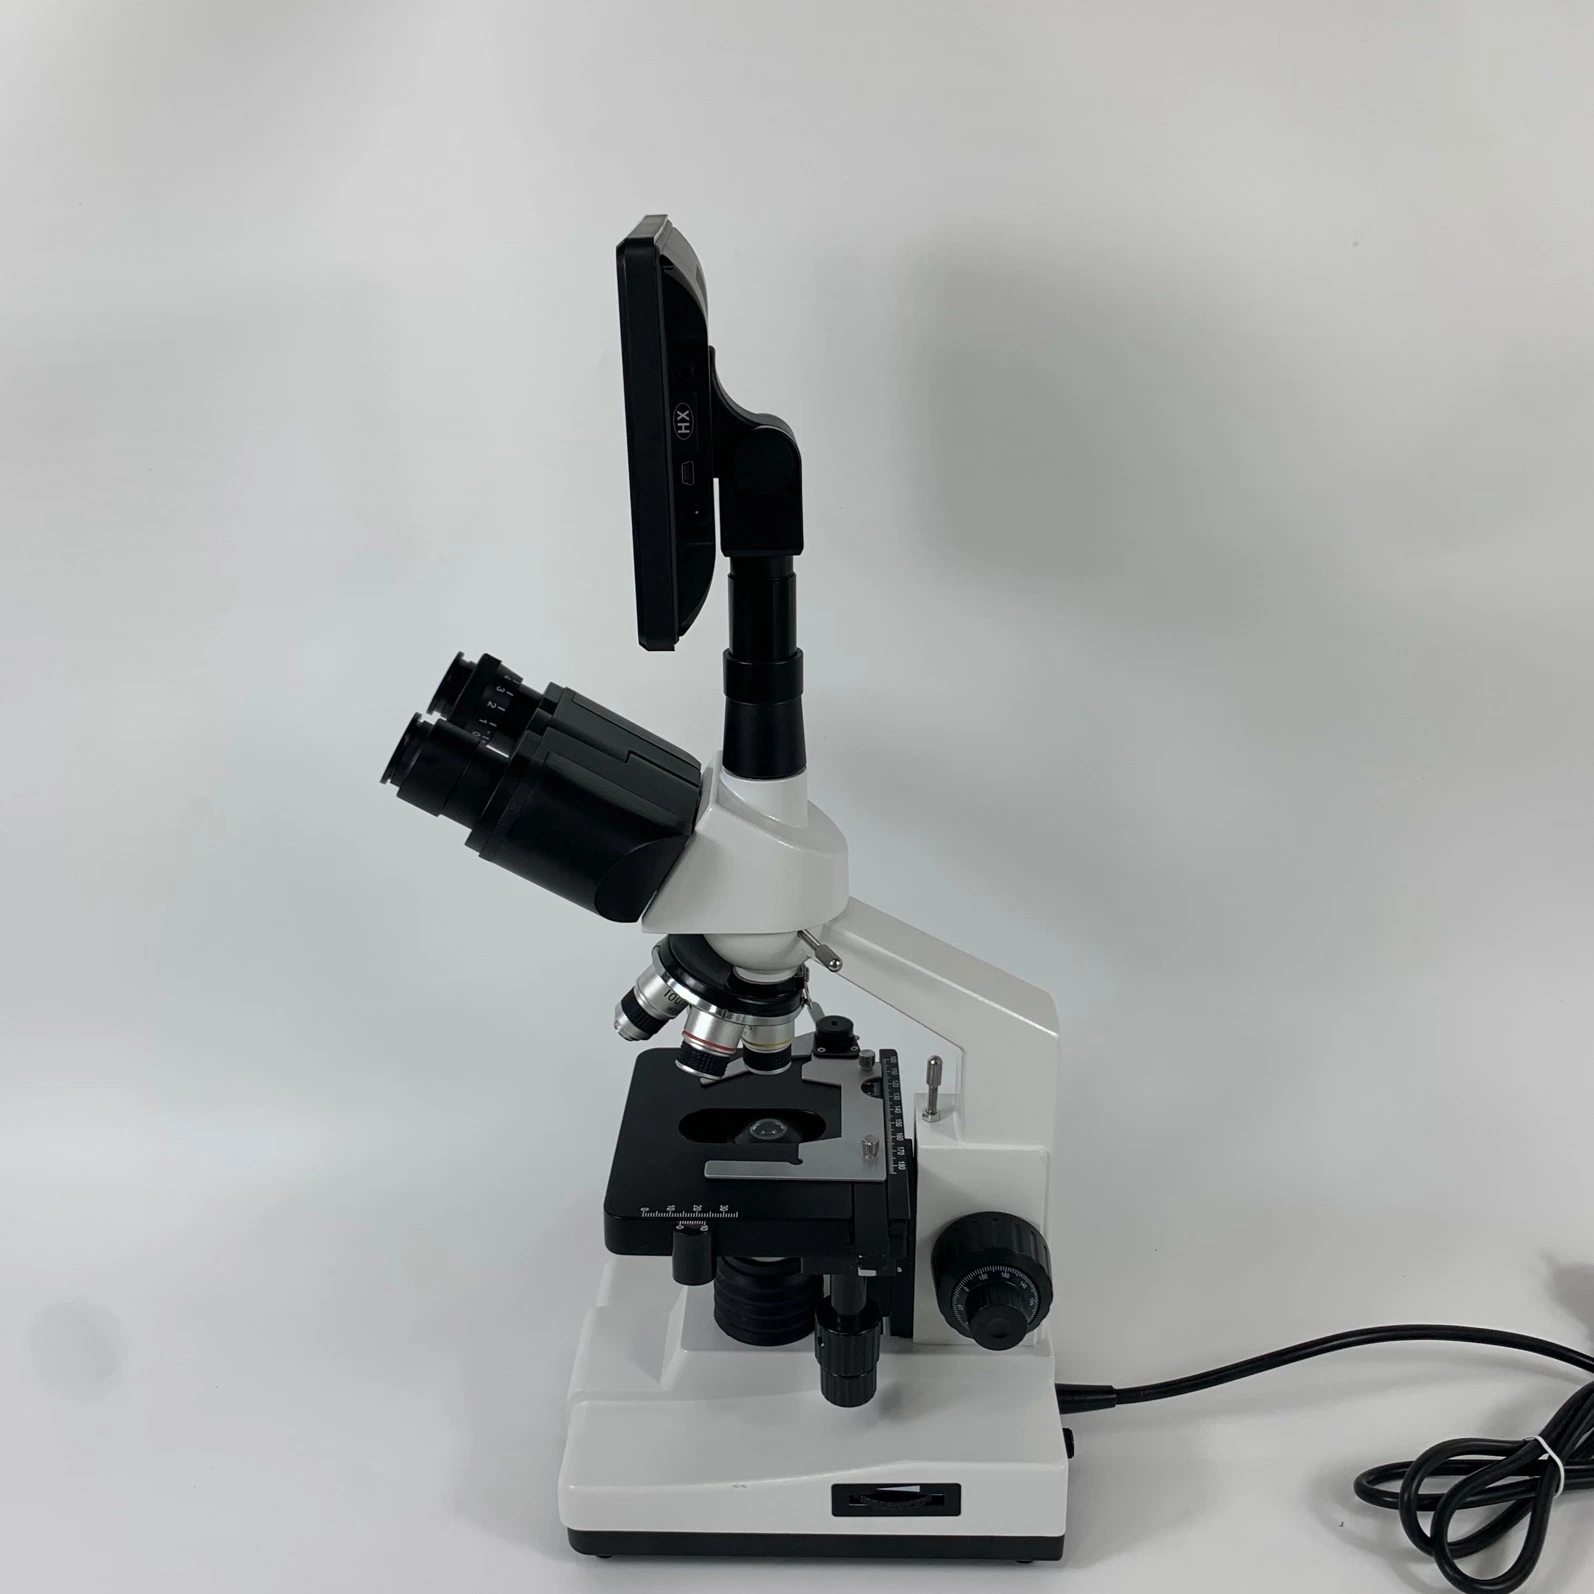 Professional Manufacturer of Trinocular Head Microscope with Screen Xsp-100sm